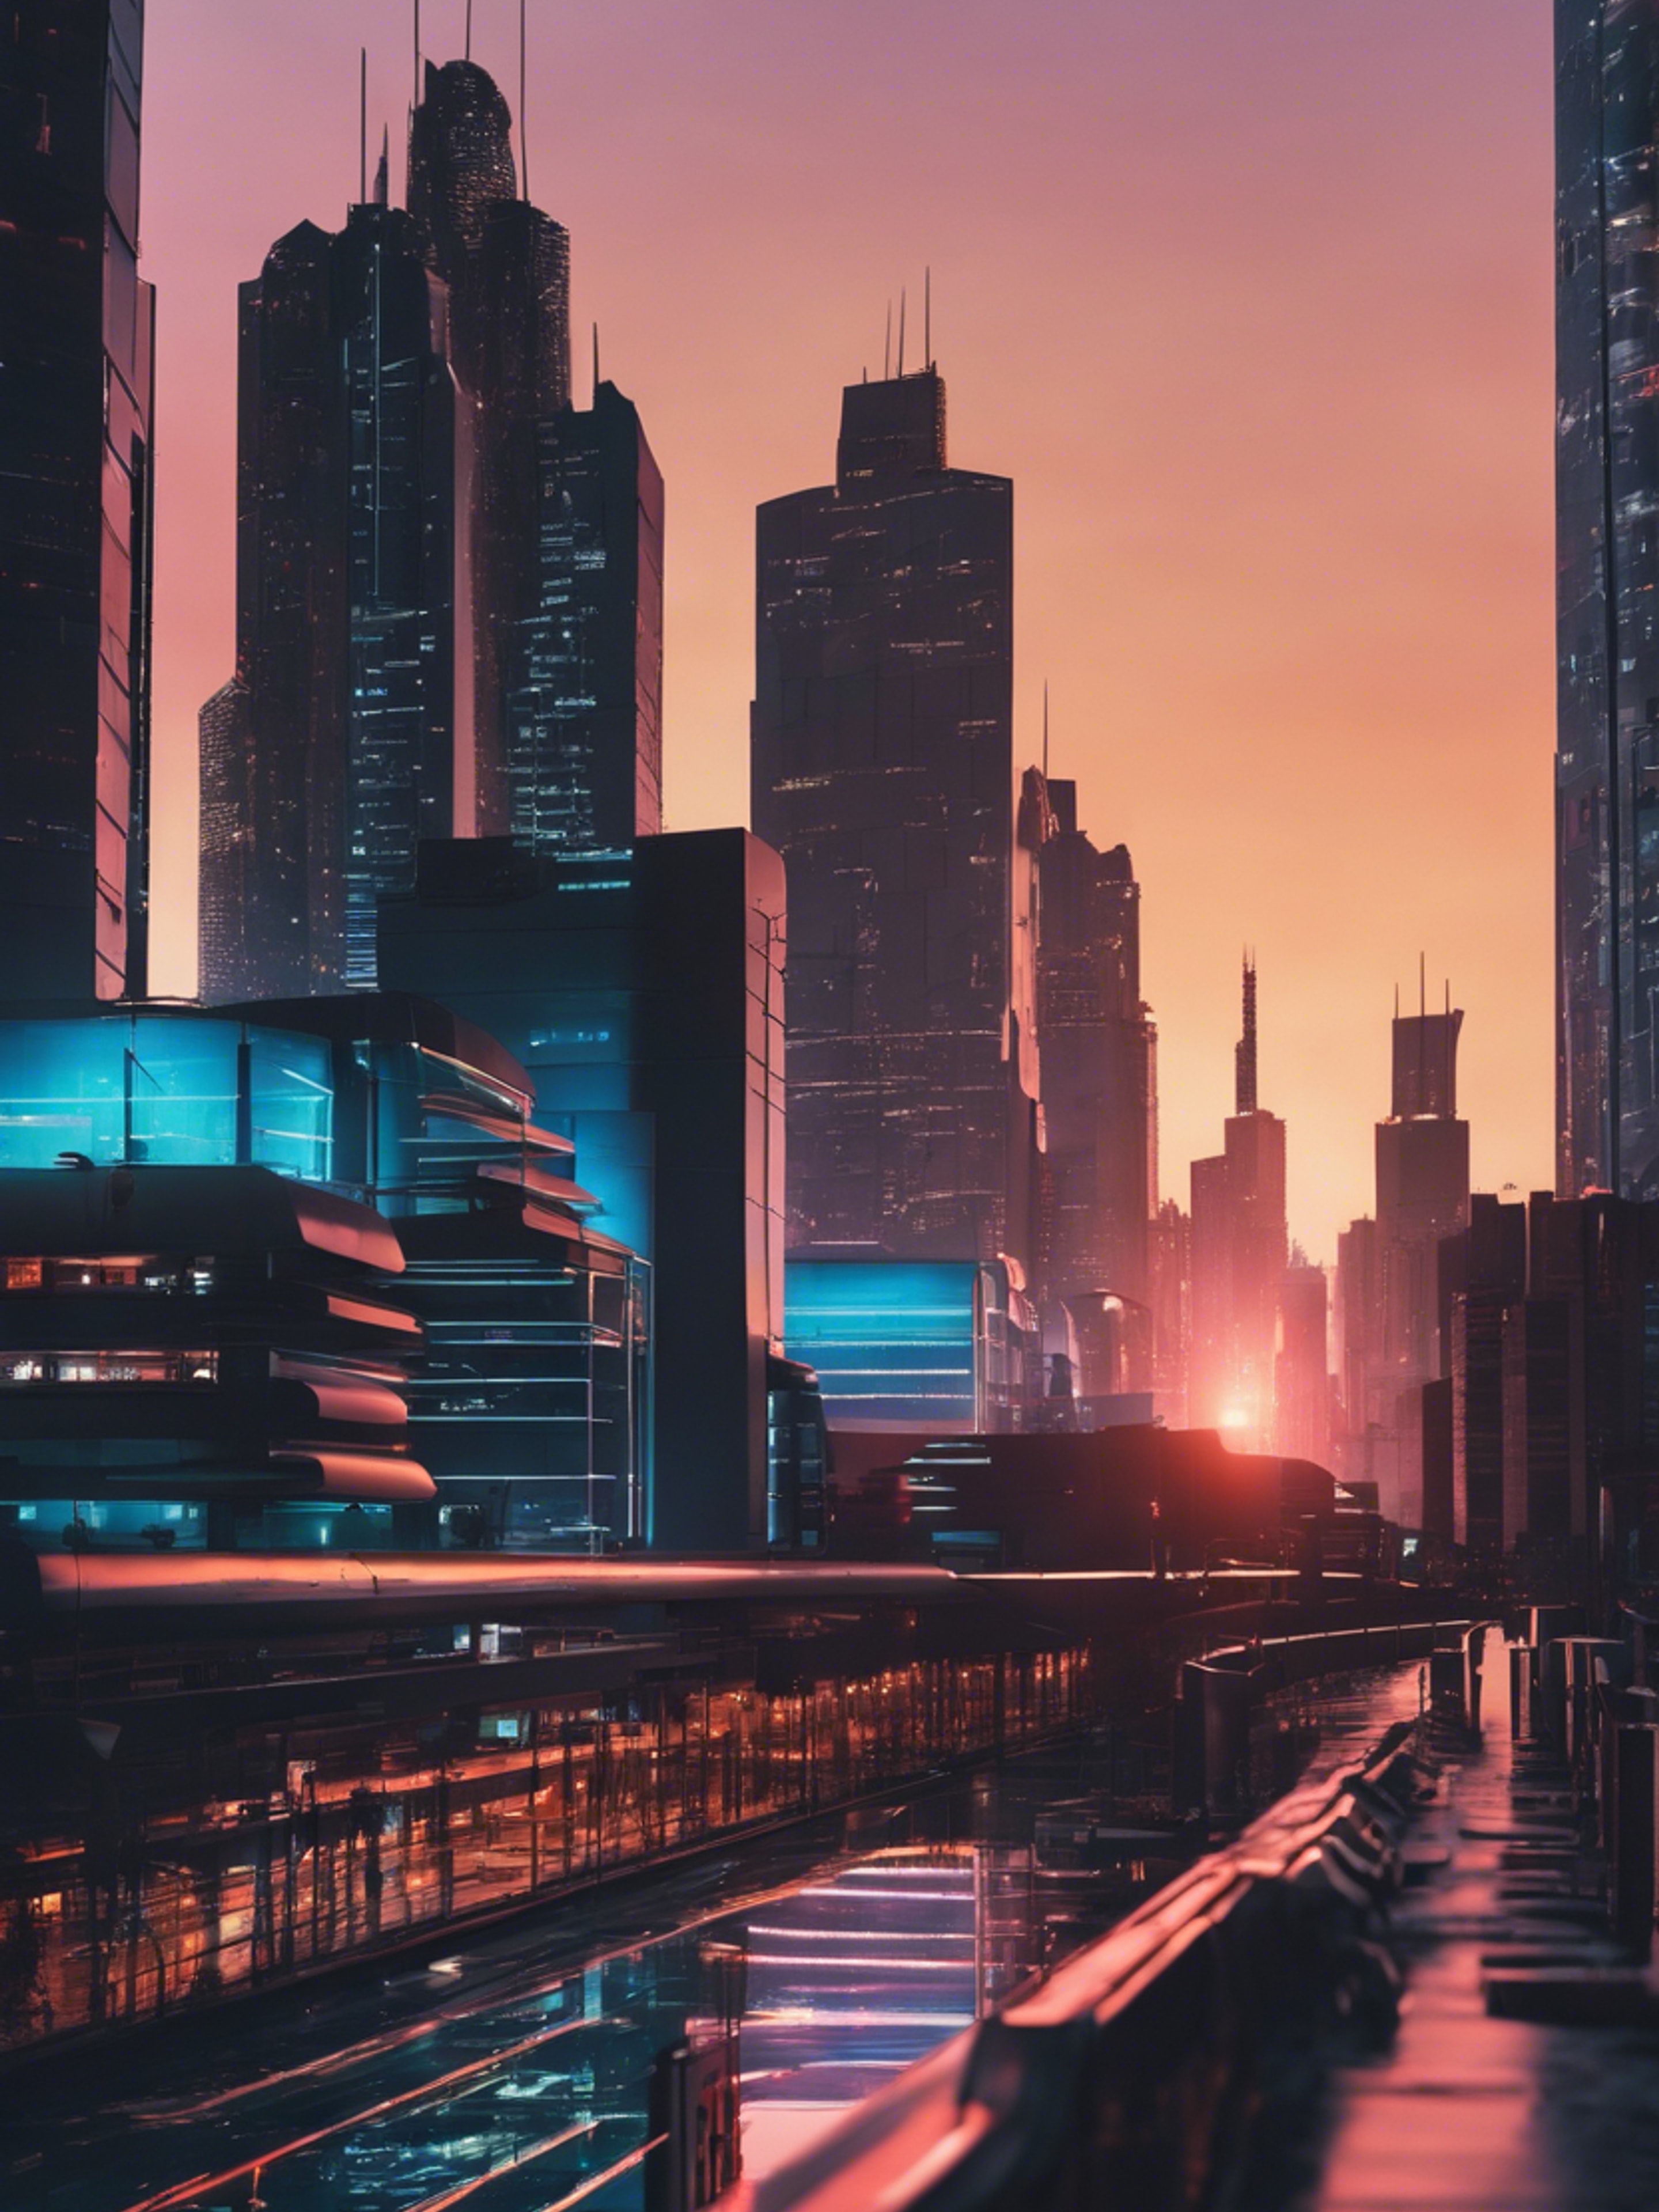 A sleek, futuristic cityscape at sunset, with buildings made of reflective black glass, sparking with cool neon lights. Tapeta[602b1b36f4744978842c]